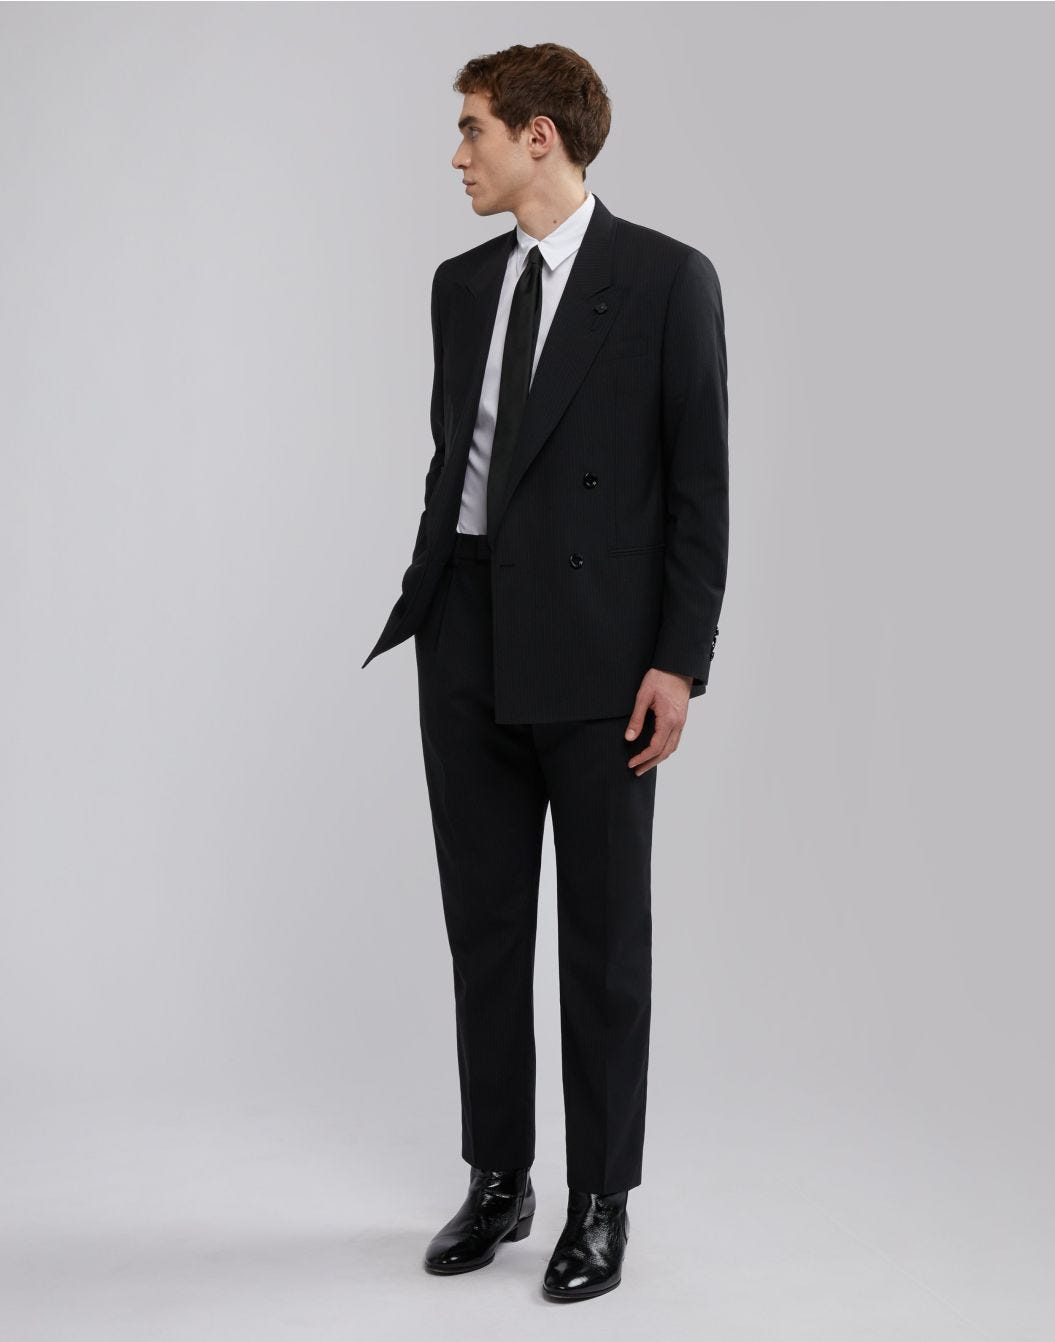 Black trousers with contrasting pinstripes